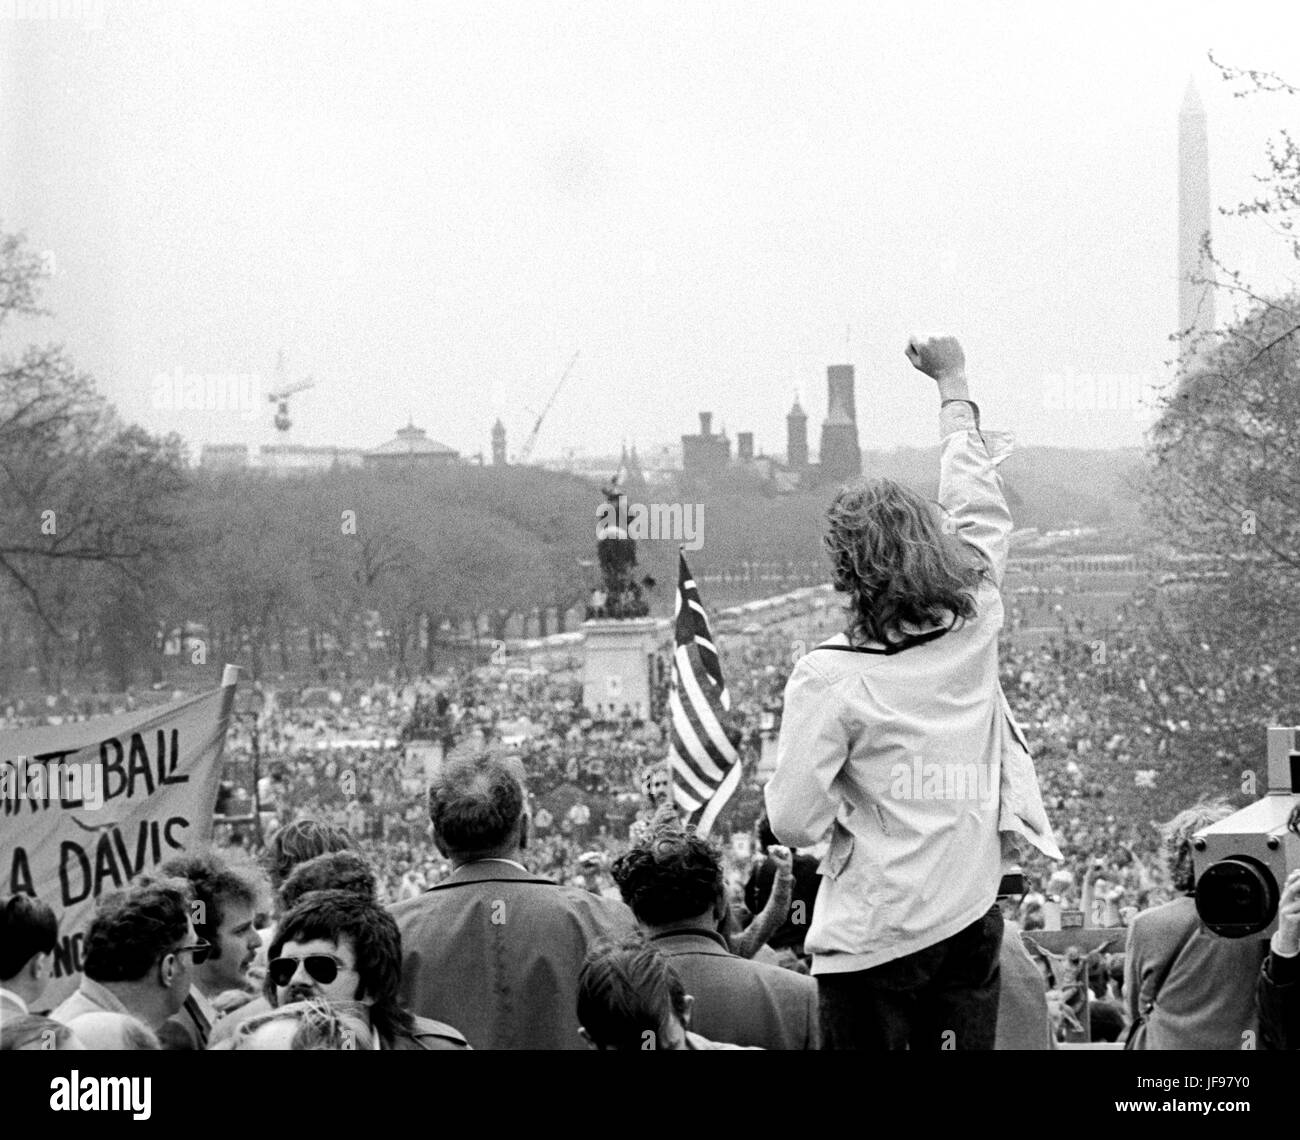 A demonstrator raises a clenched fist toward antiwar protestors on the U.S. Capitol grounds and the Mall during massive demonstrations against the Vietnam war on April 23, 1971 as Lt. John Kerry prepares to speak. Stock Photo